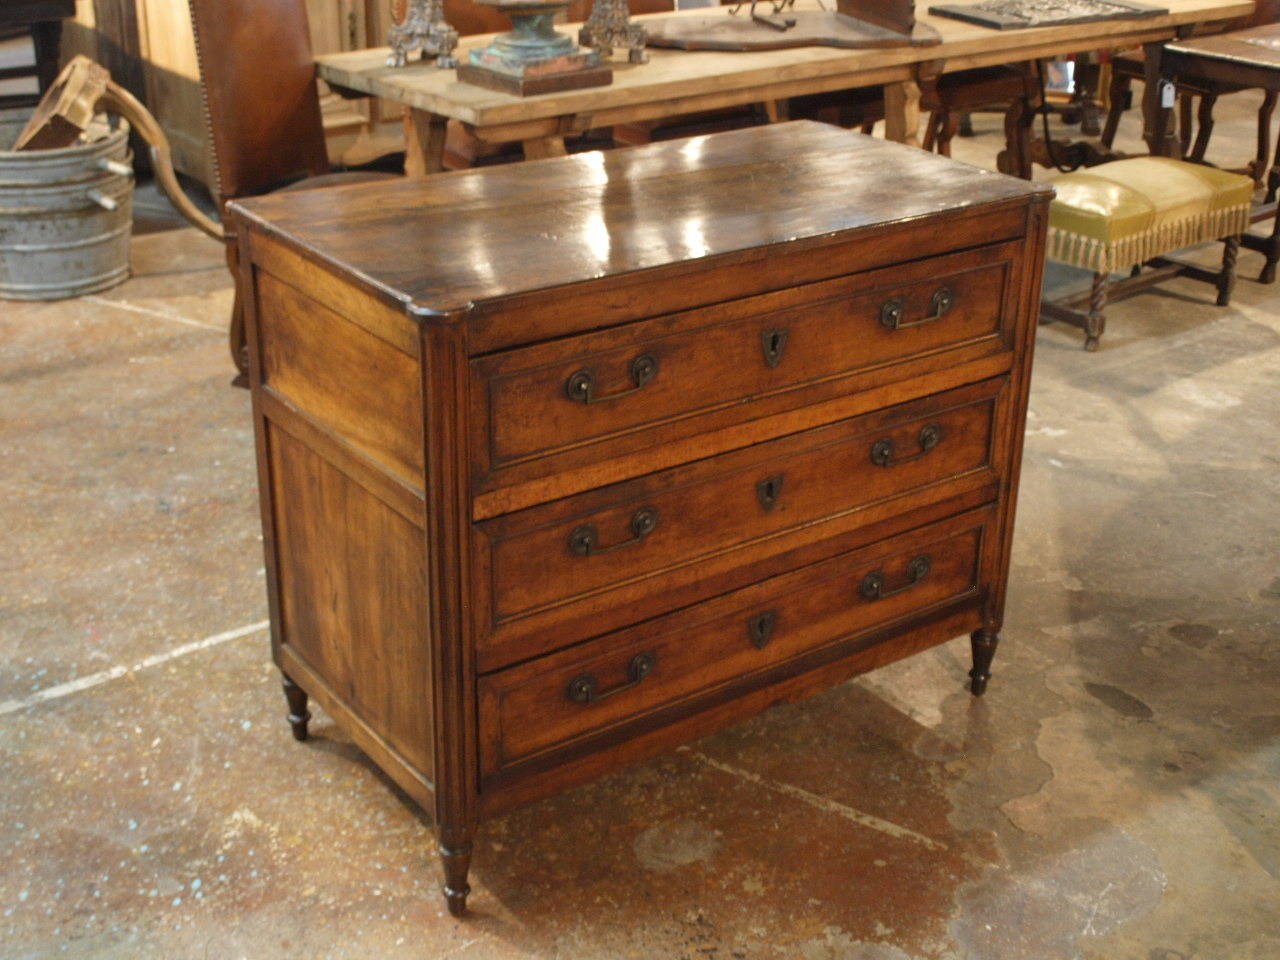 A stately and handsome French 18th century period Louis XVI commode in walnut. Beautifully constructed with a rectangular top with rounded front corners above a conforming case with fluted columnar supports housing three drawers with original brass